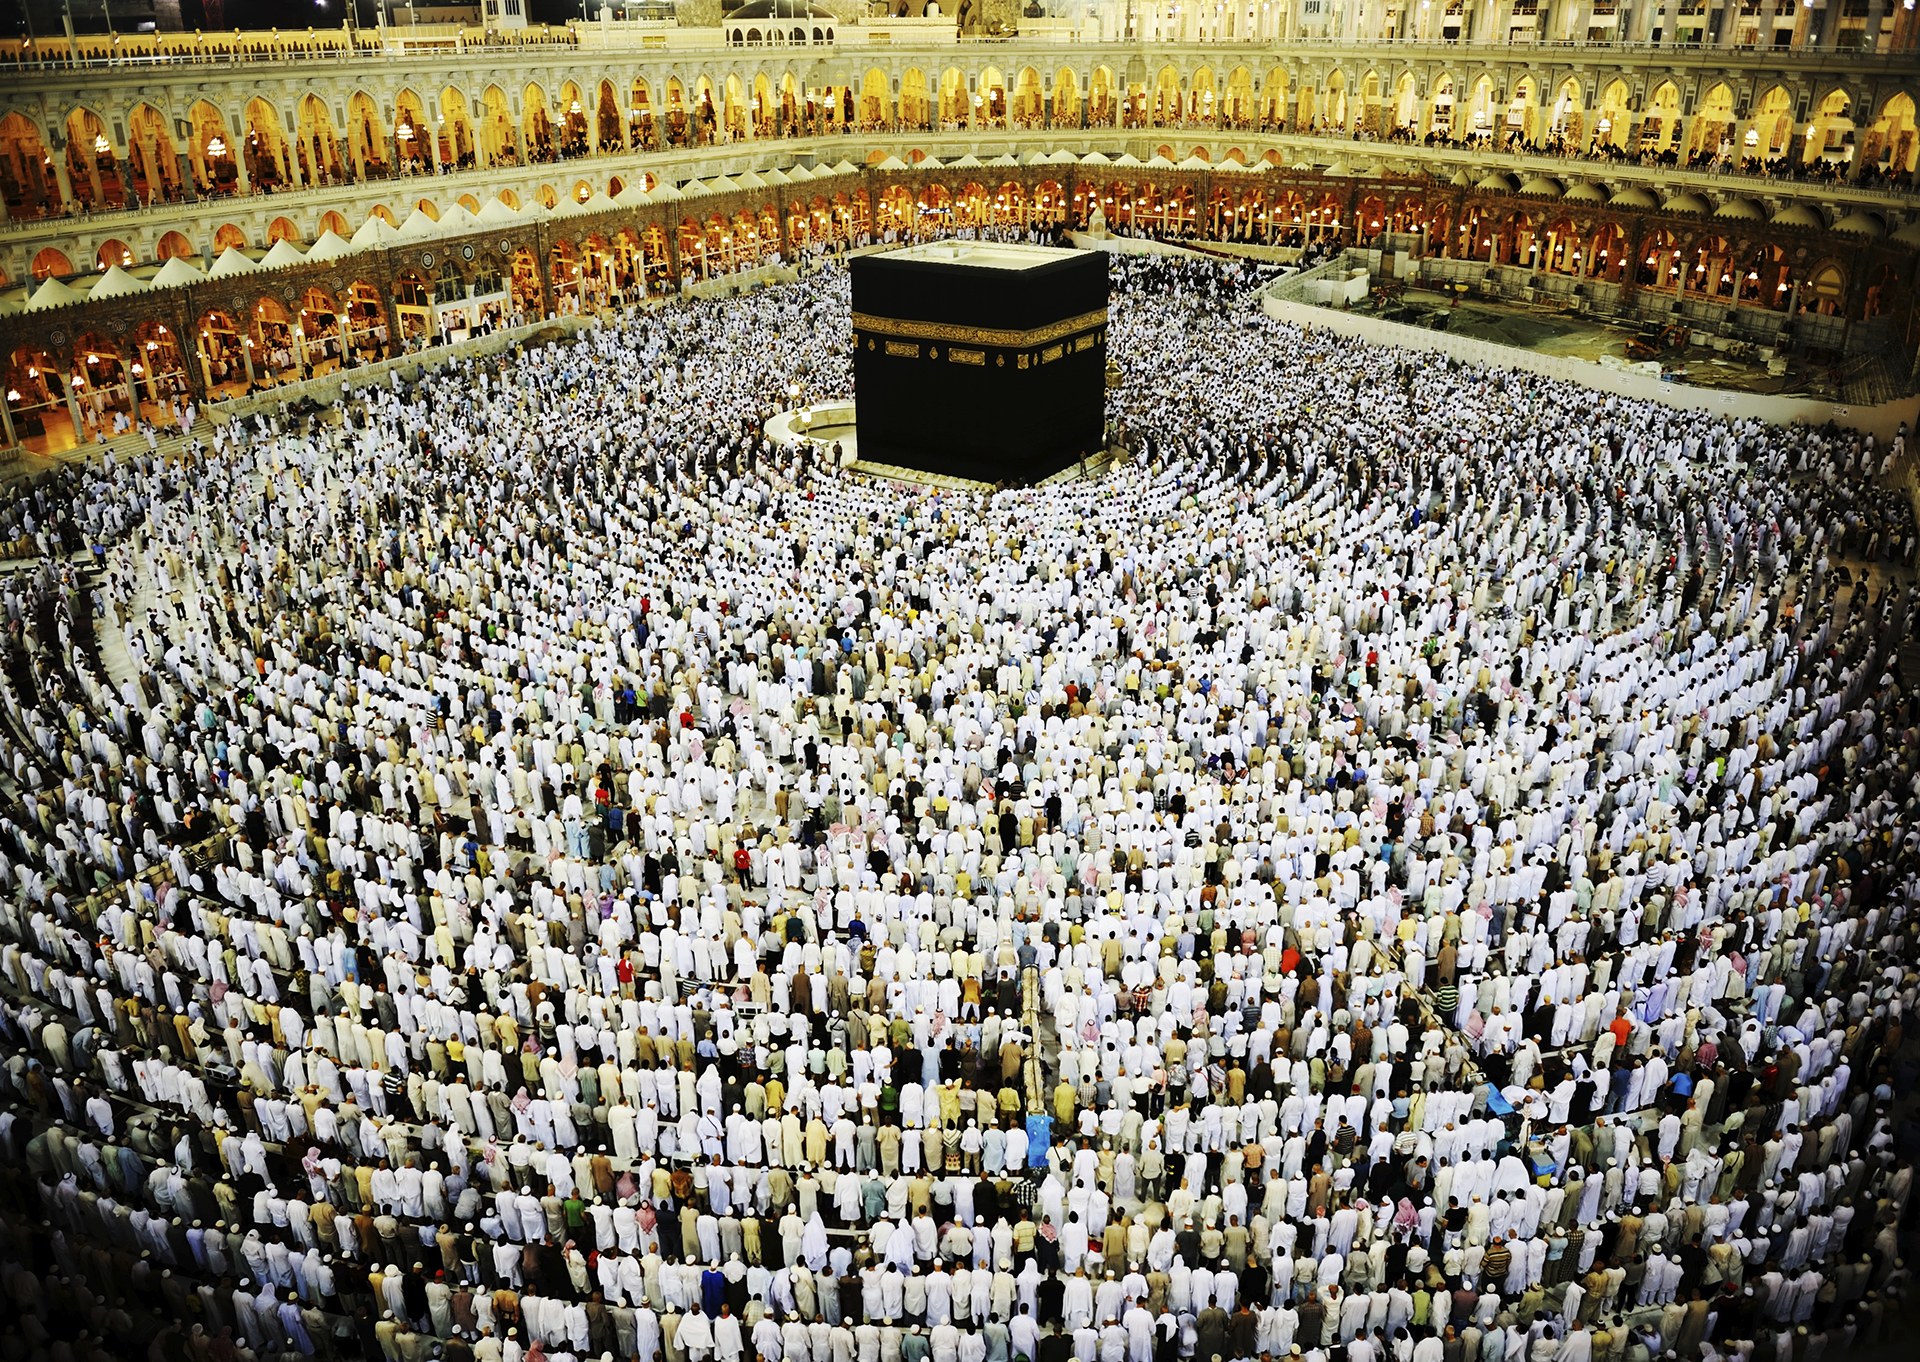 Toppling Cranes Aren't the Only Things Threatening Mecca | WIRED